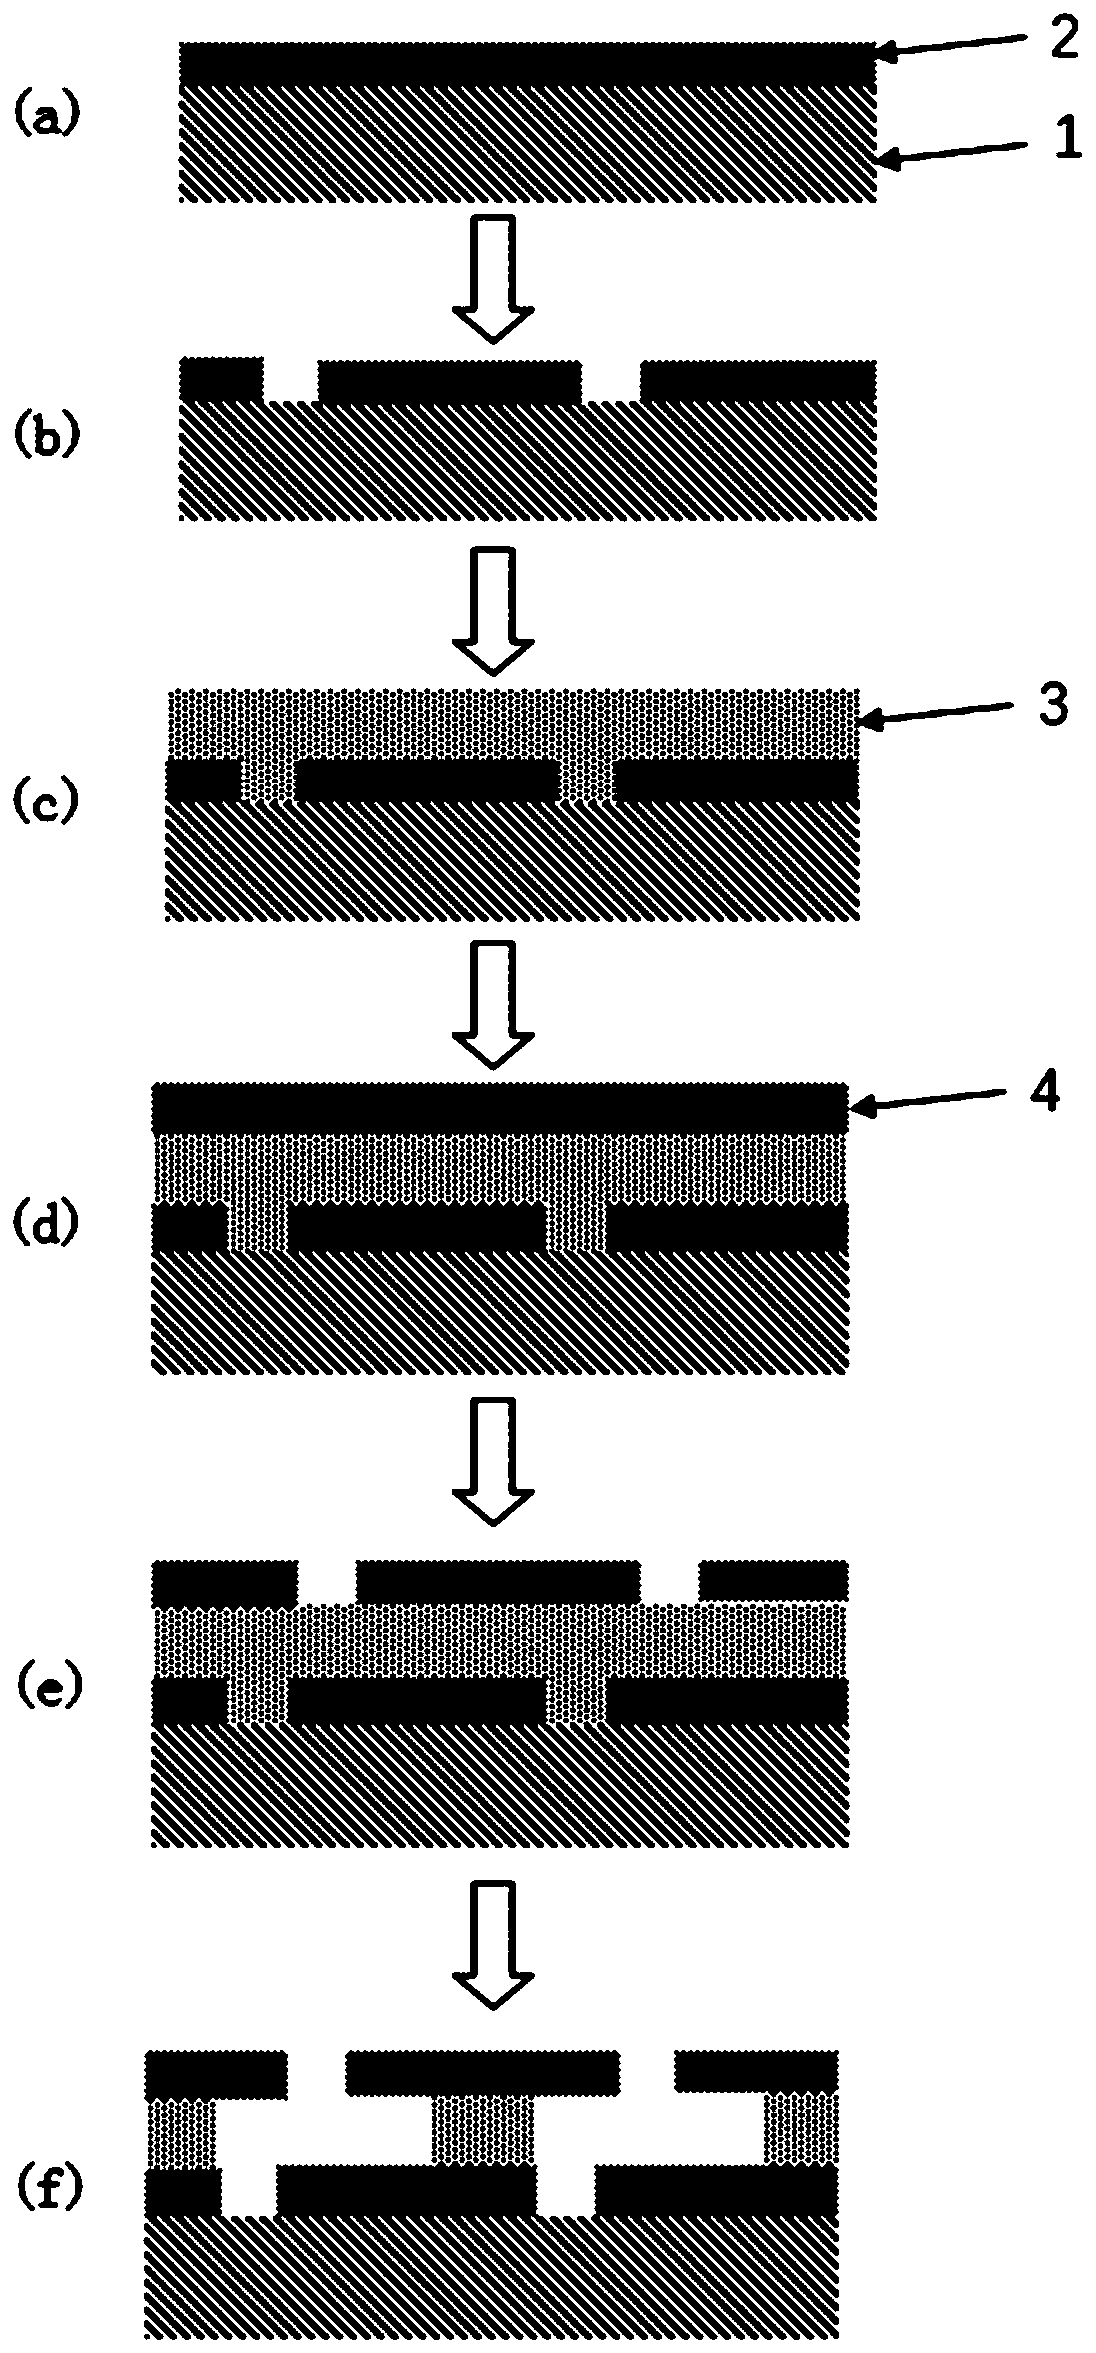 Epitaxial layer material stripping method based on 3D laminated mask substrate